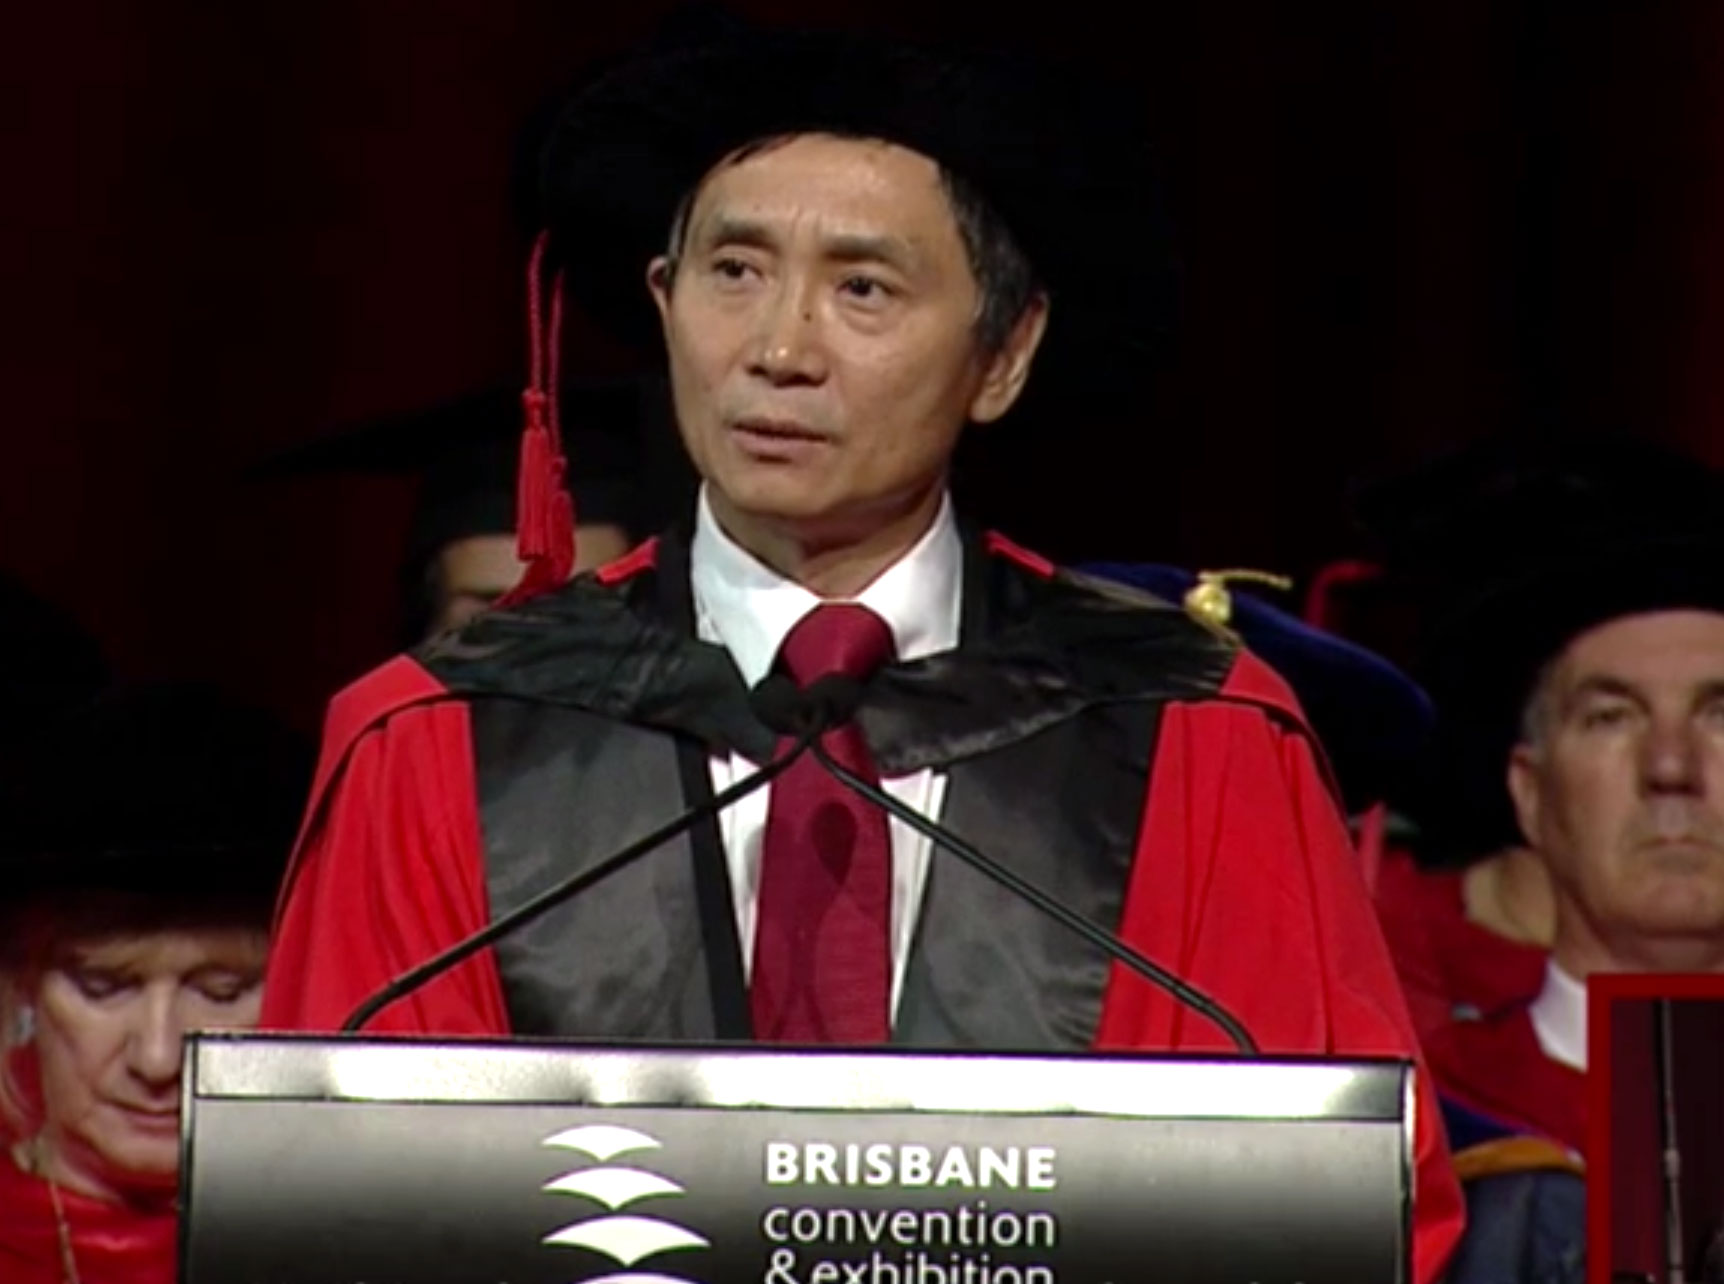 Li Cunxin presenting the Occasional Address at a Griffith University graduation ceremony.